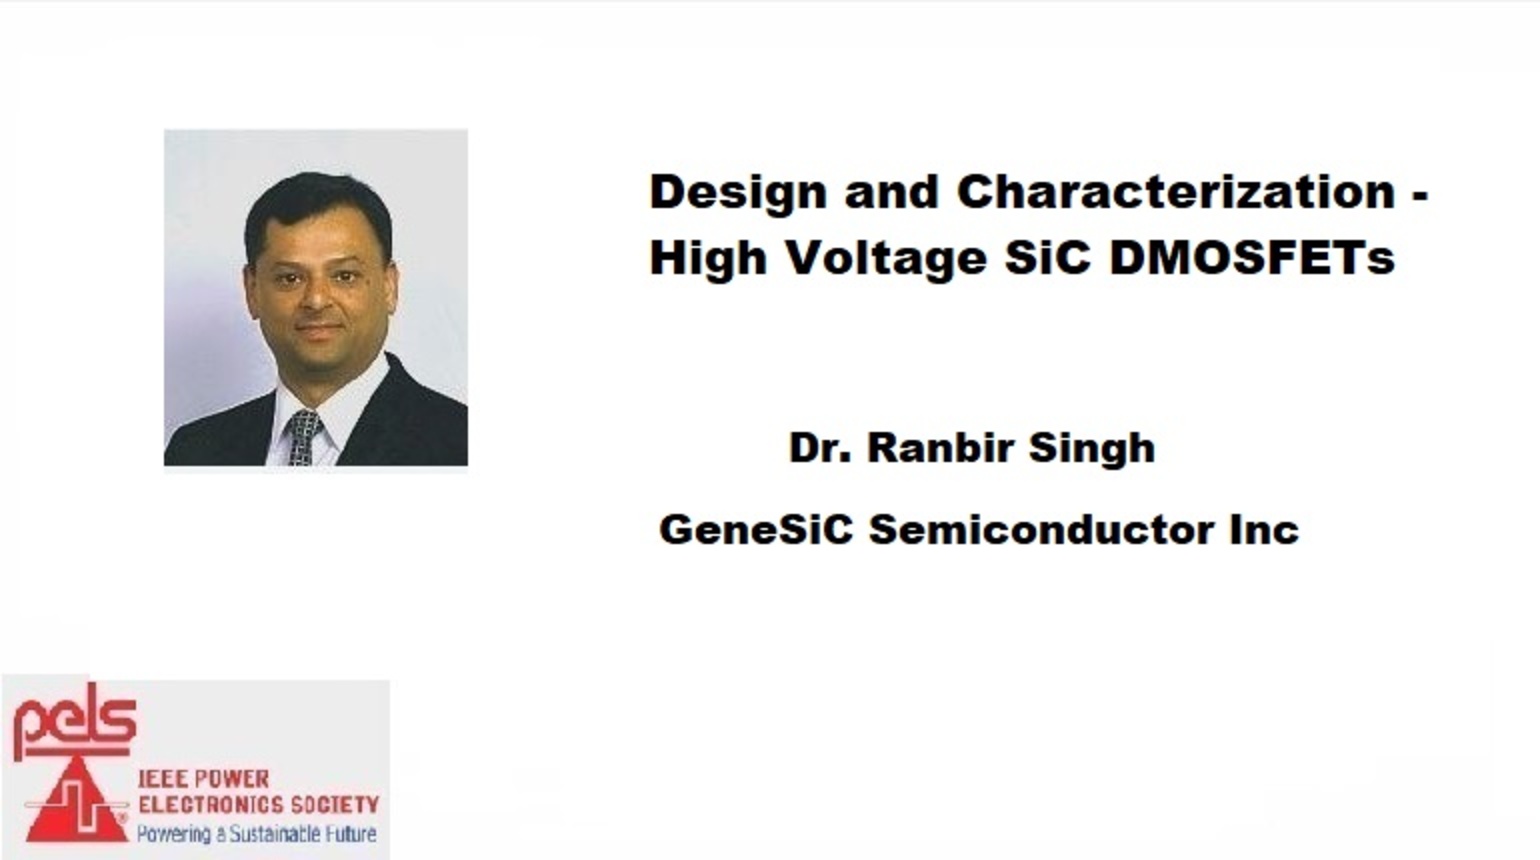 Design and Characterization - High Voltage SiC DMOSFETs